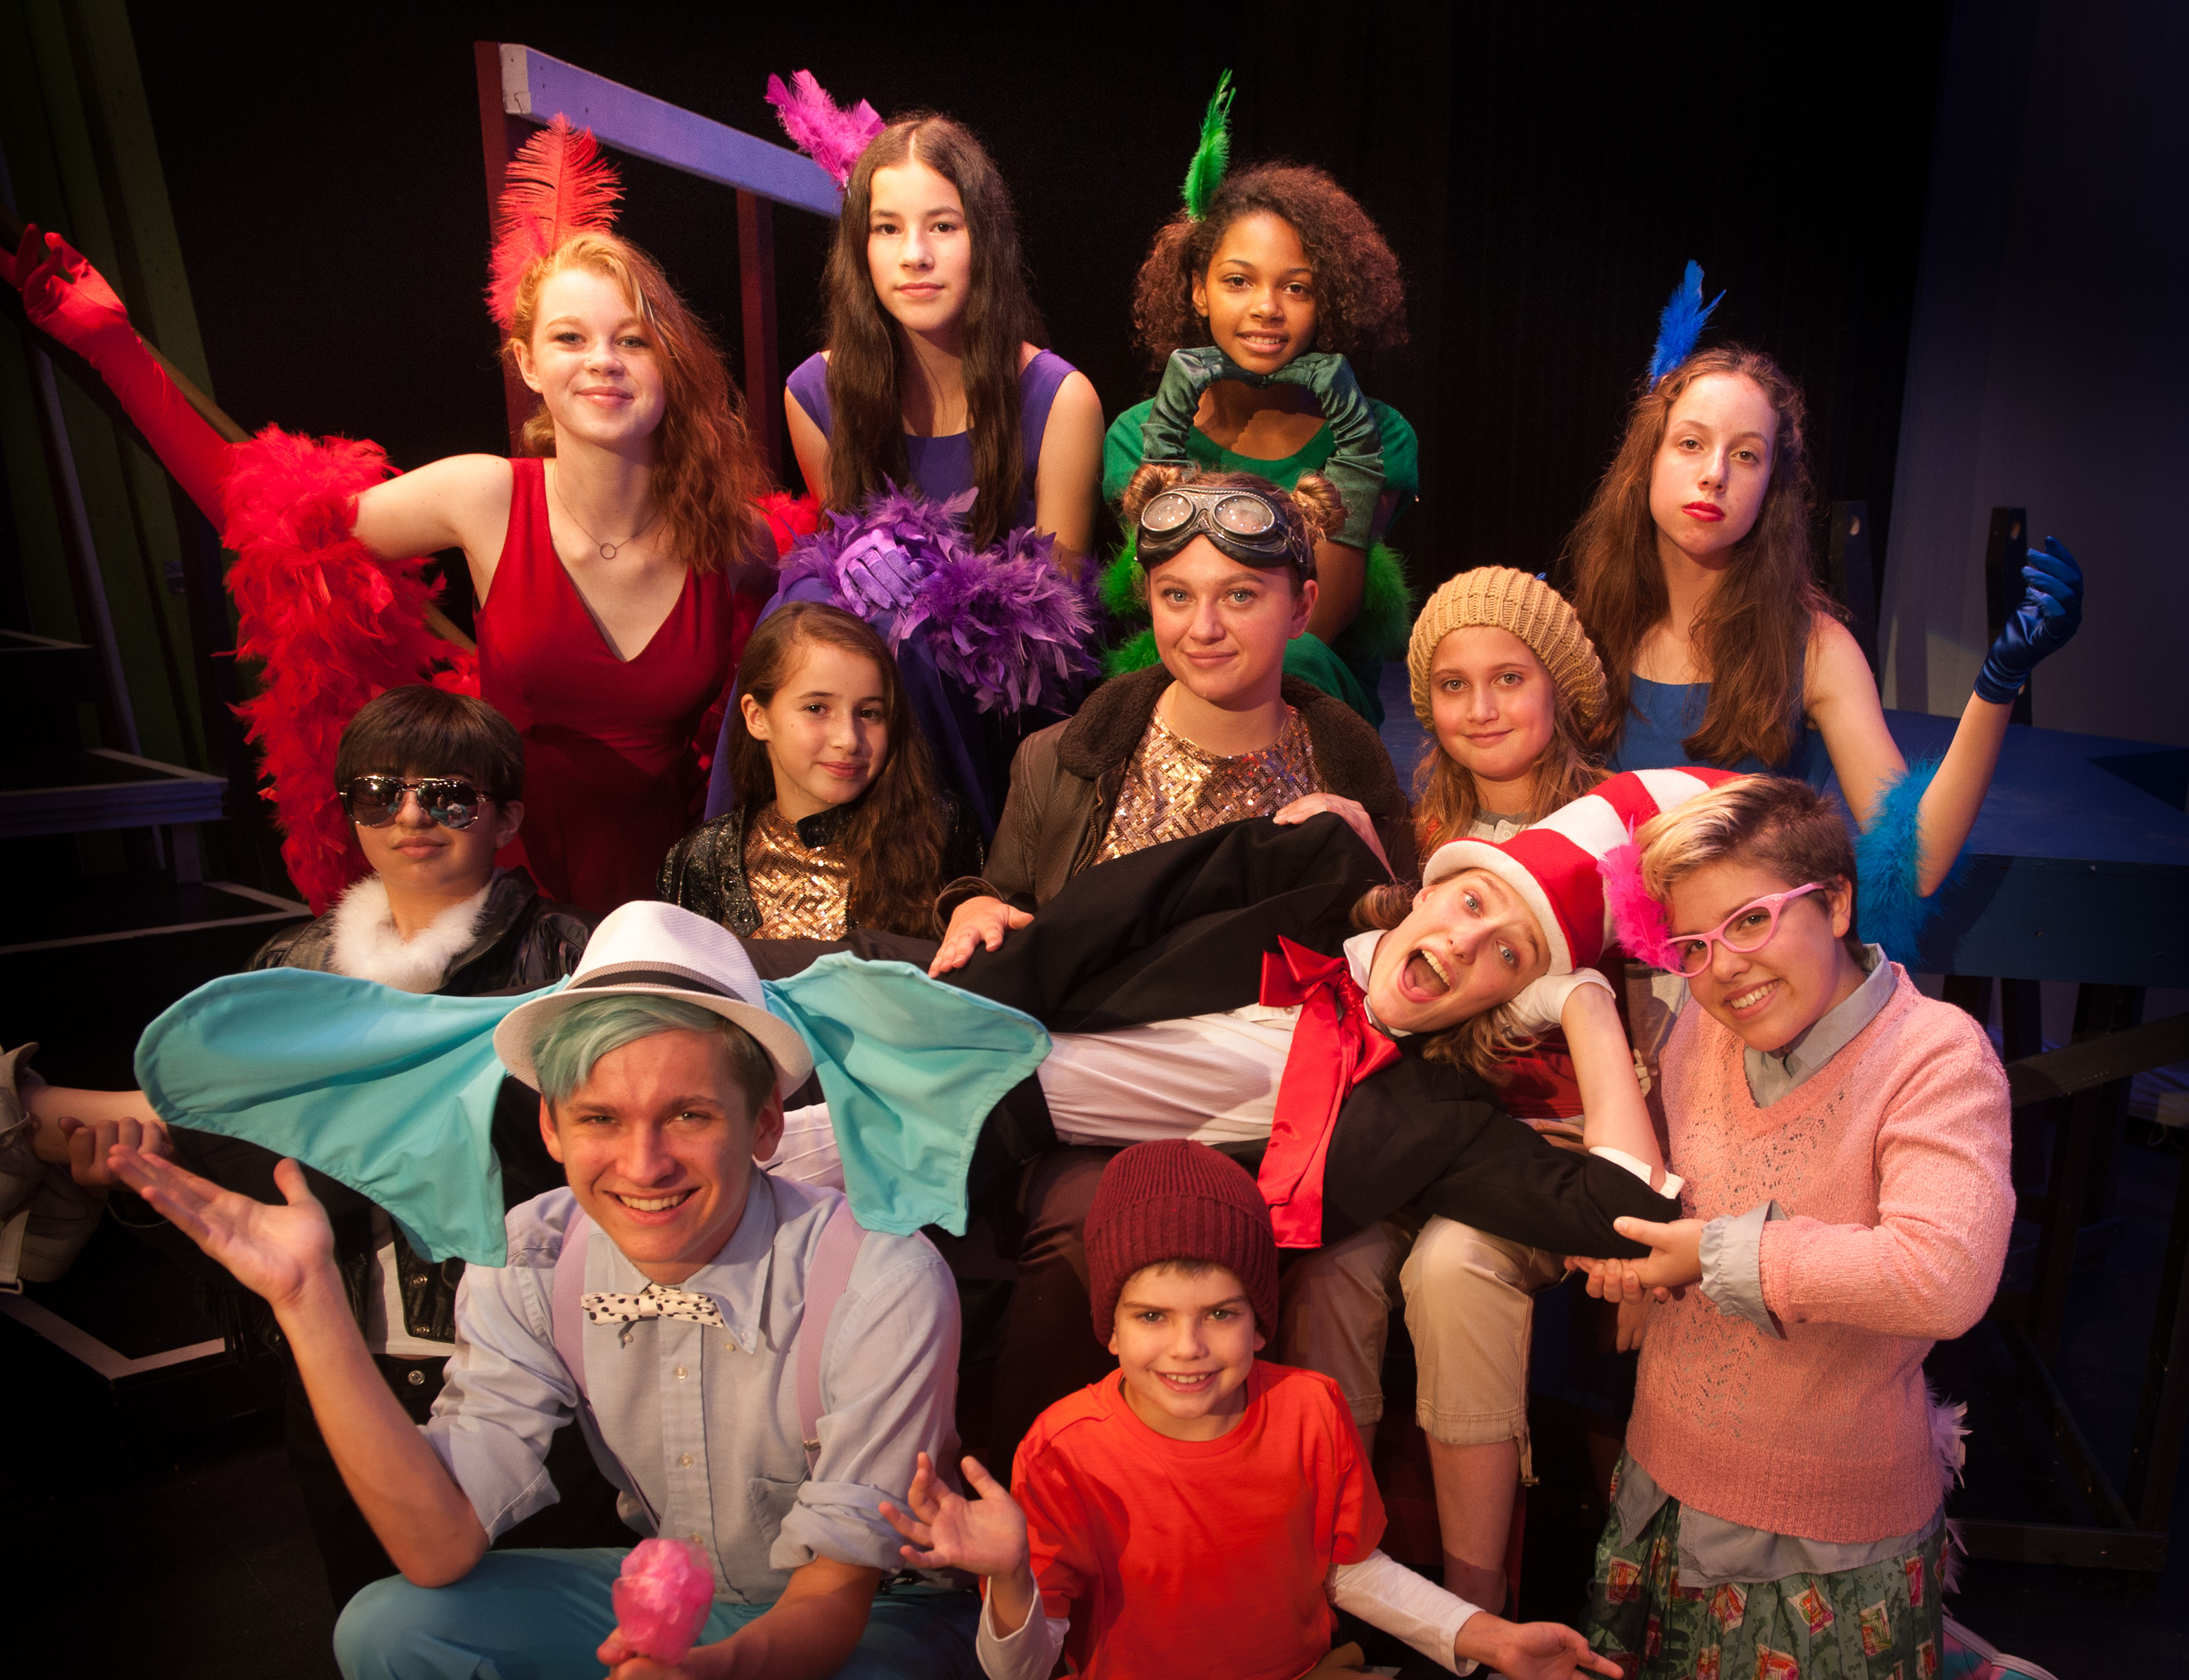 Lost Nation Theater cast of characters for Seussical in bright costumes